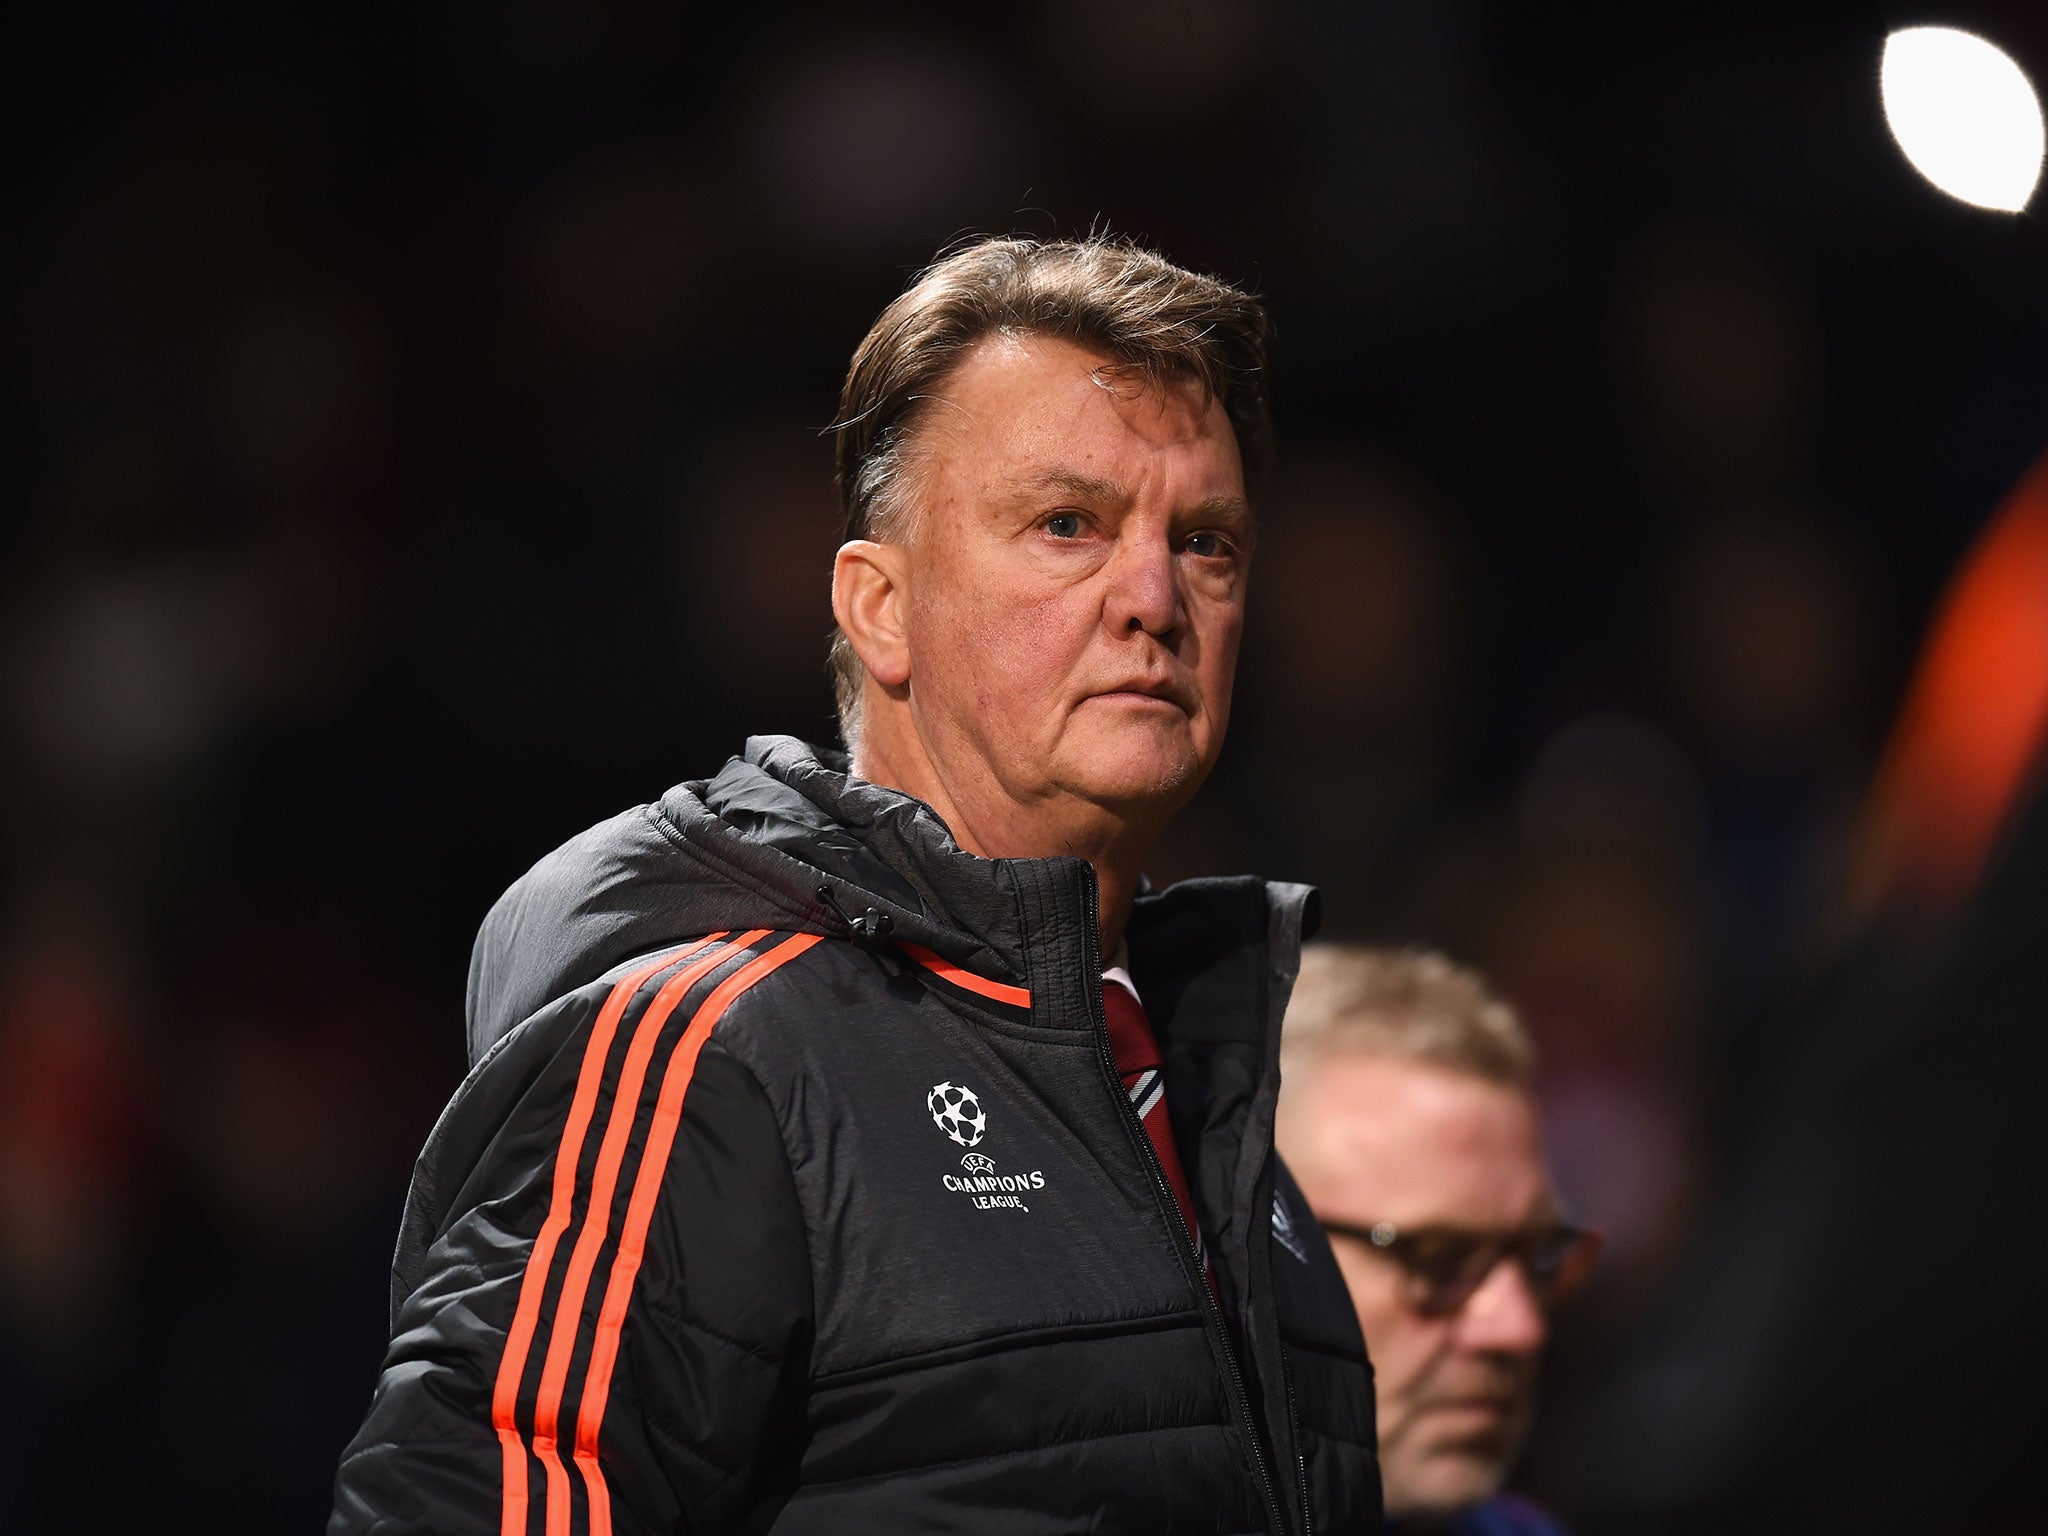 Louis van Gaal is 'worried' after Manchester United's 0-0 draw with PSV Eindhoven